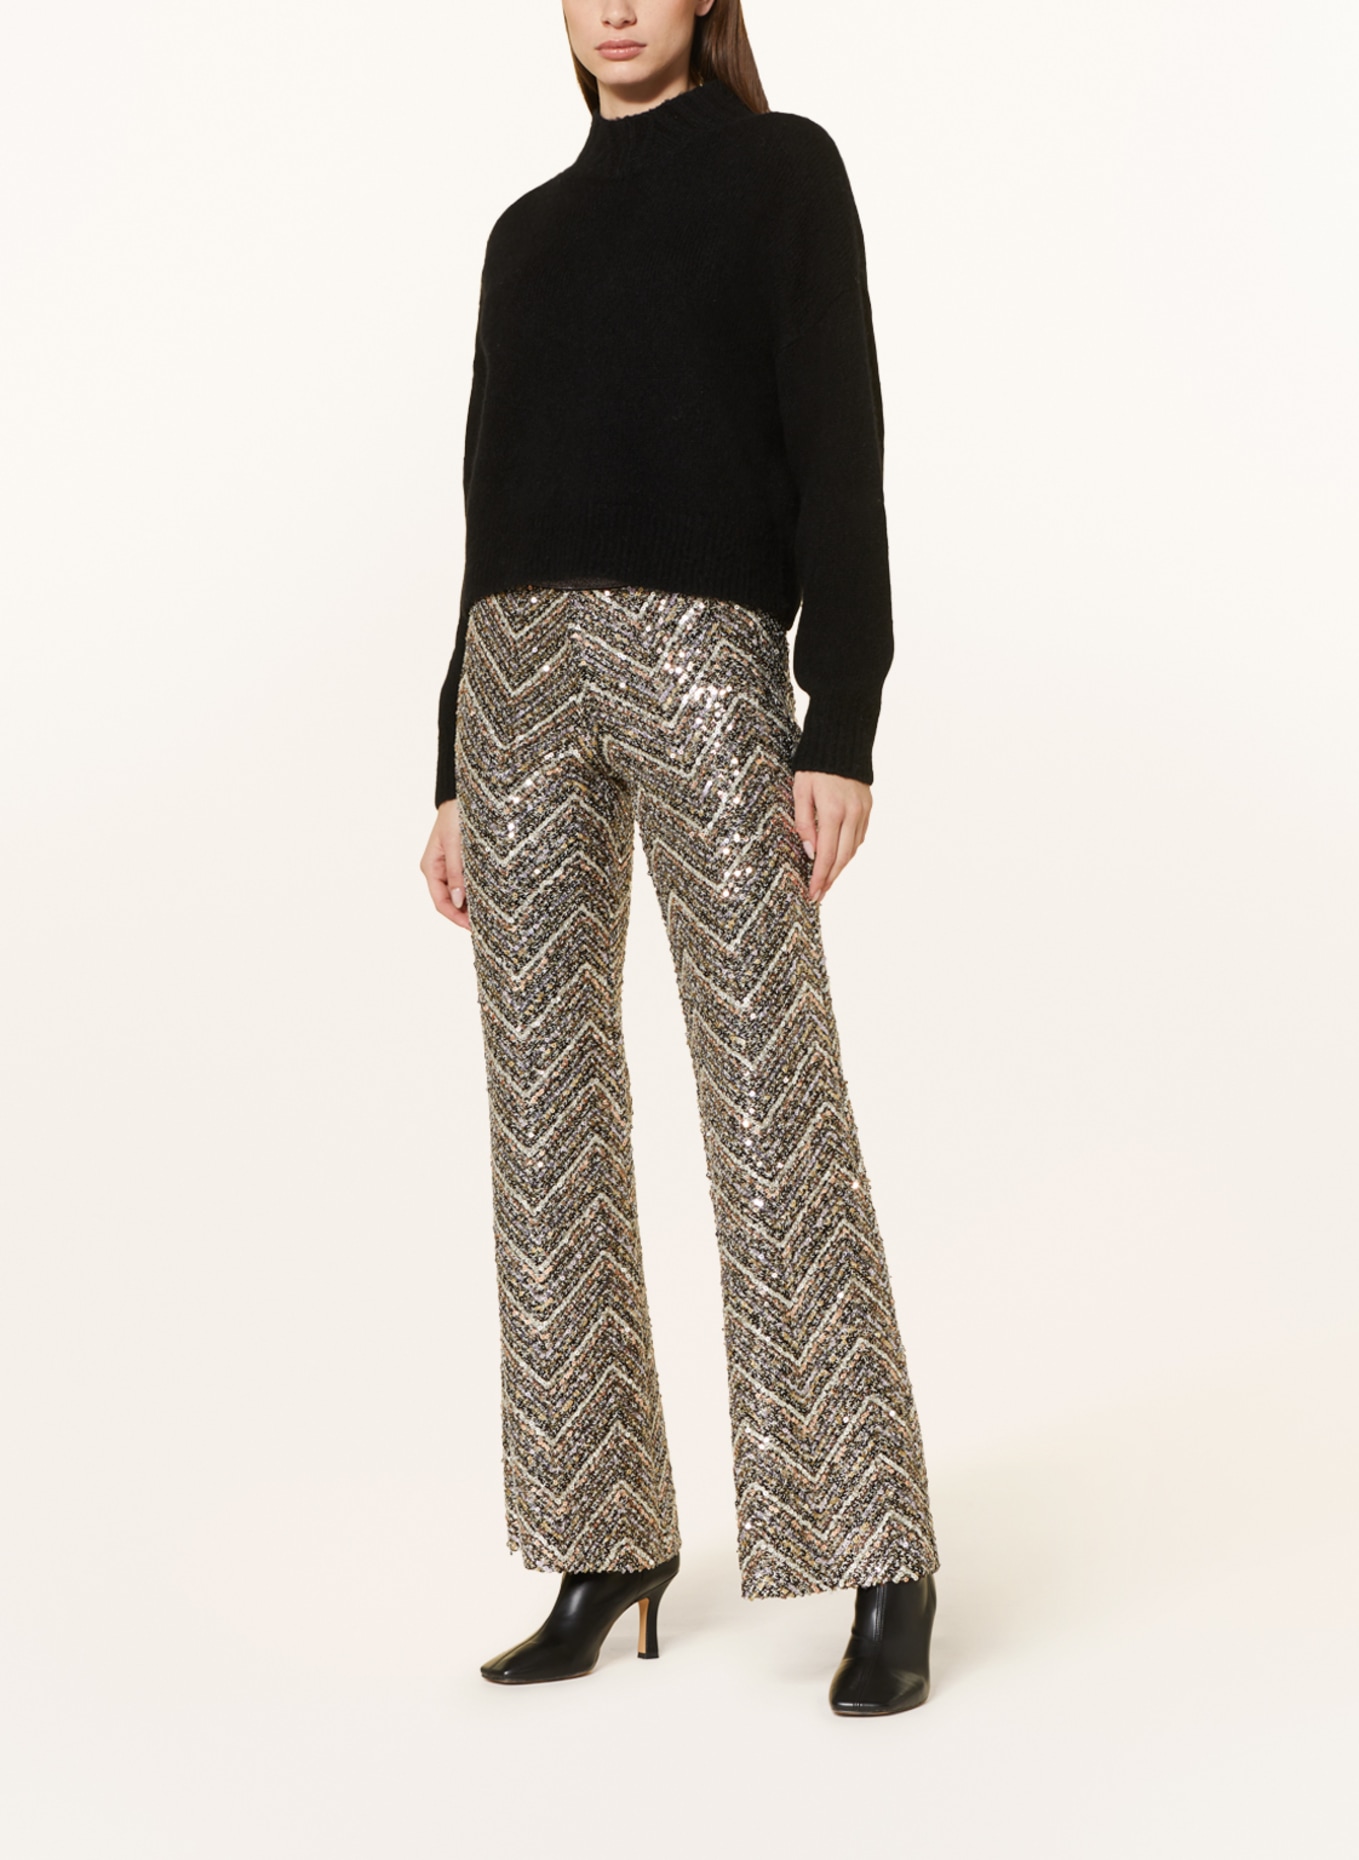 CAMBIO Trousers FRANCIS with sequins, Color: BLACK/ CREAM/ GOLD (Image 2)